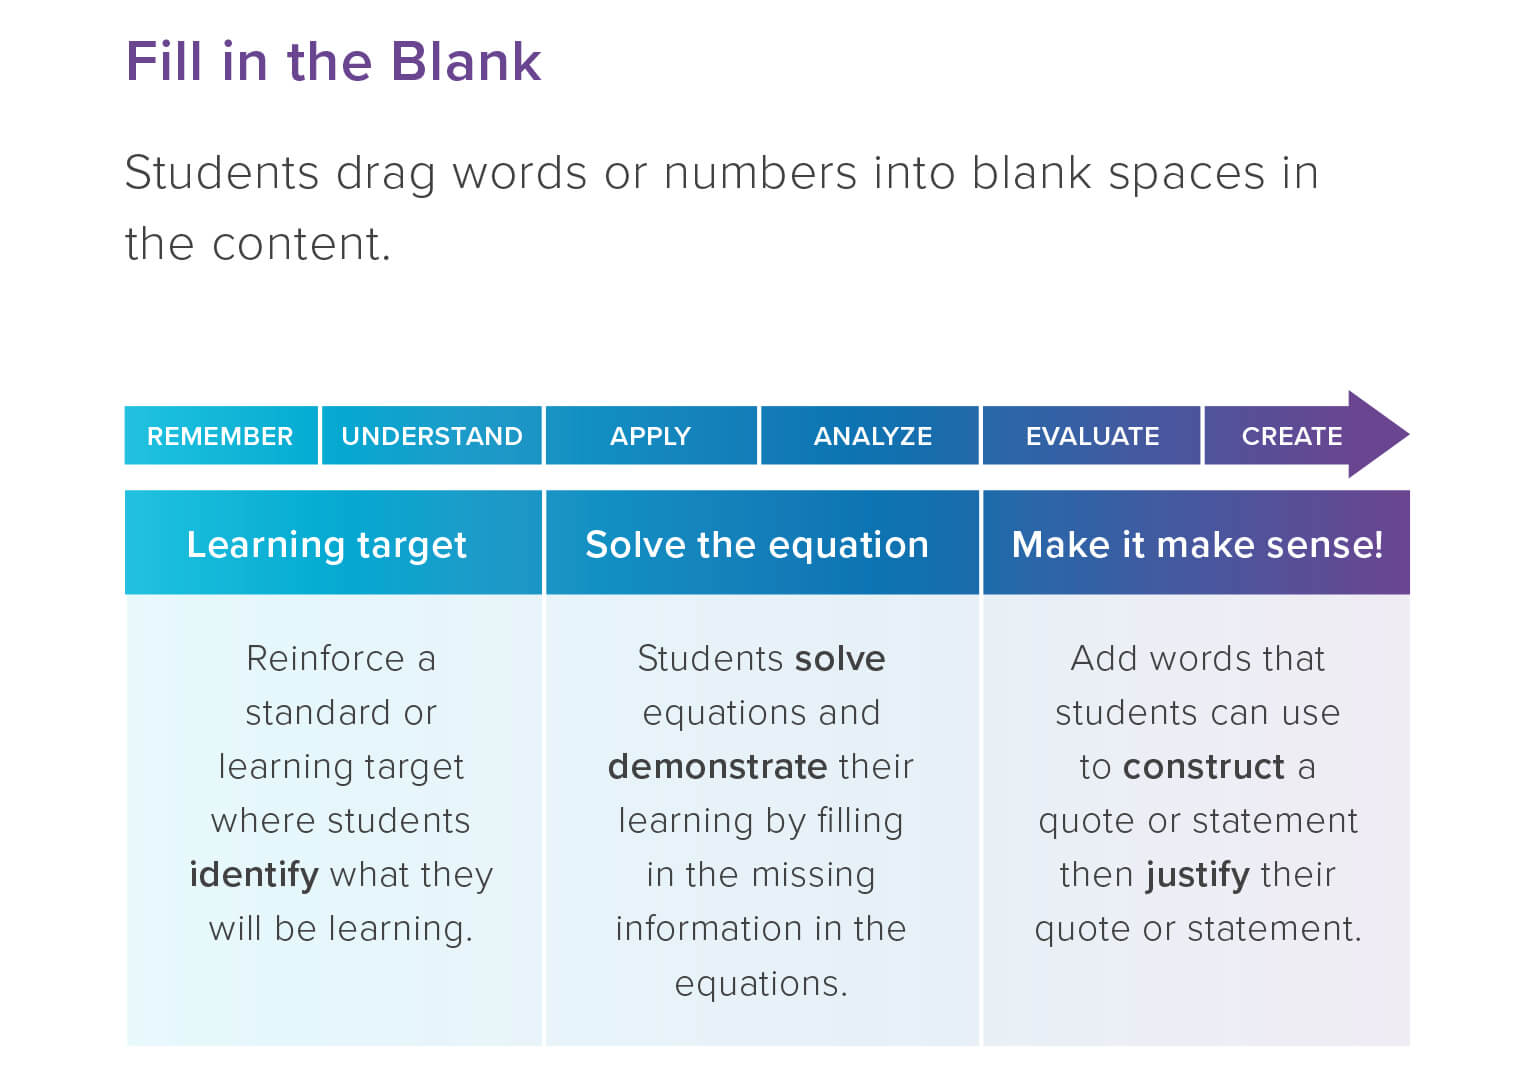 Image depicting ways to bring gamification into the classroom. The image shows a fill-in-the-blank activity.